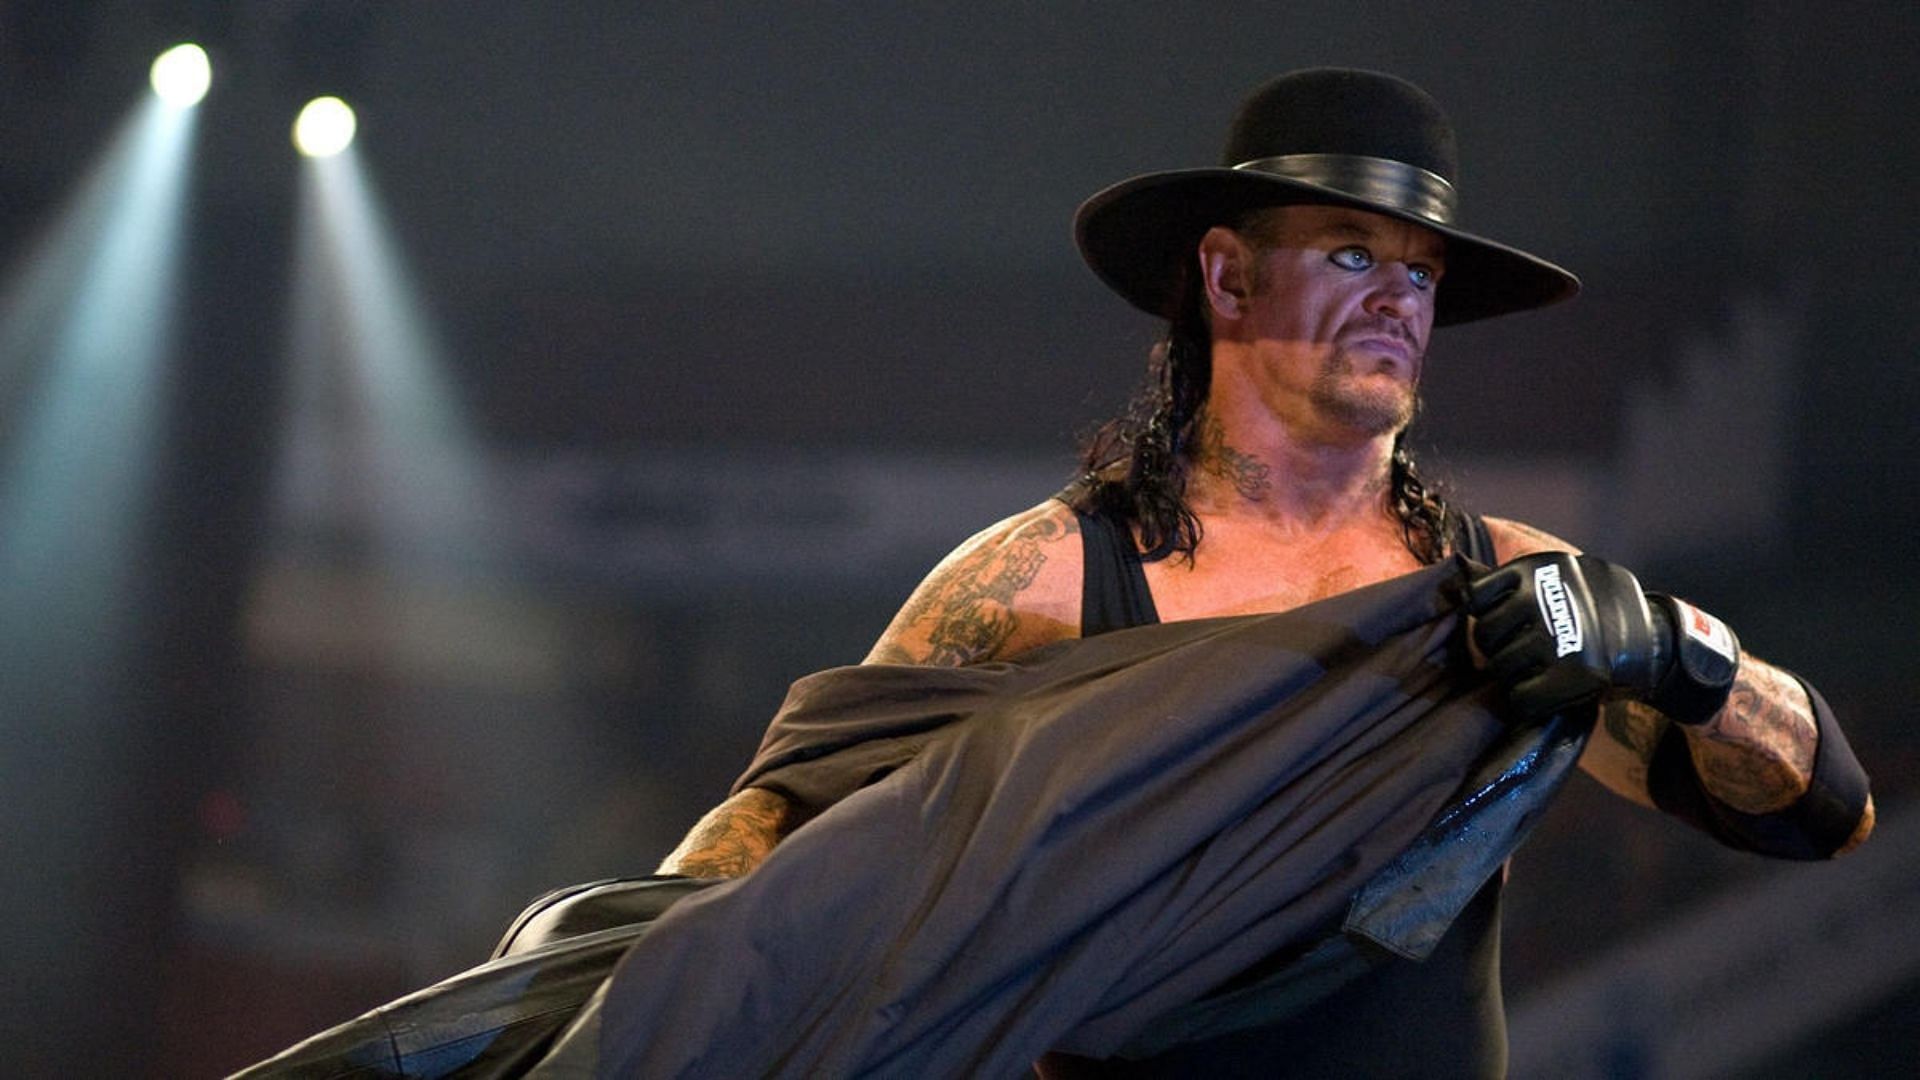 The Undertaker is one of WWE